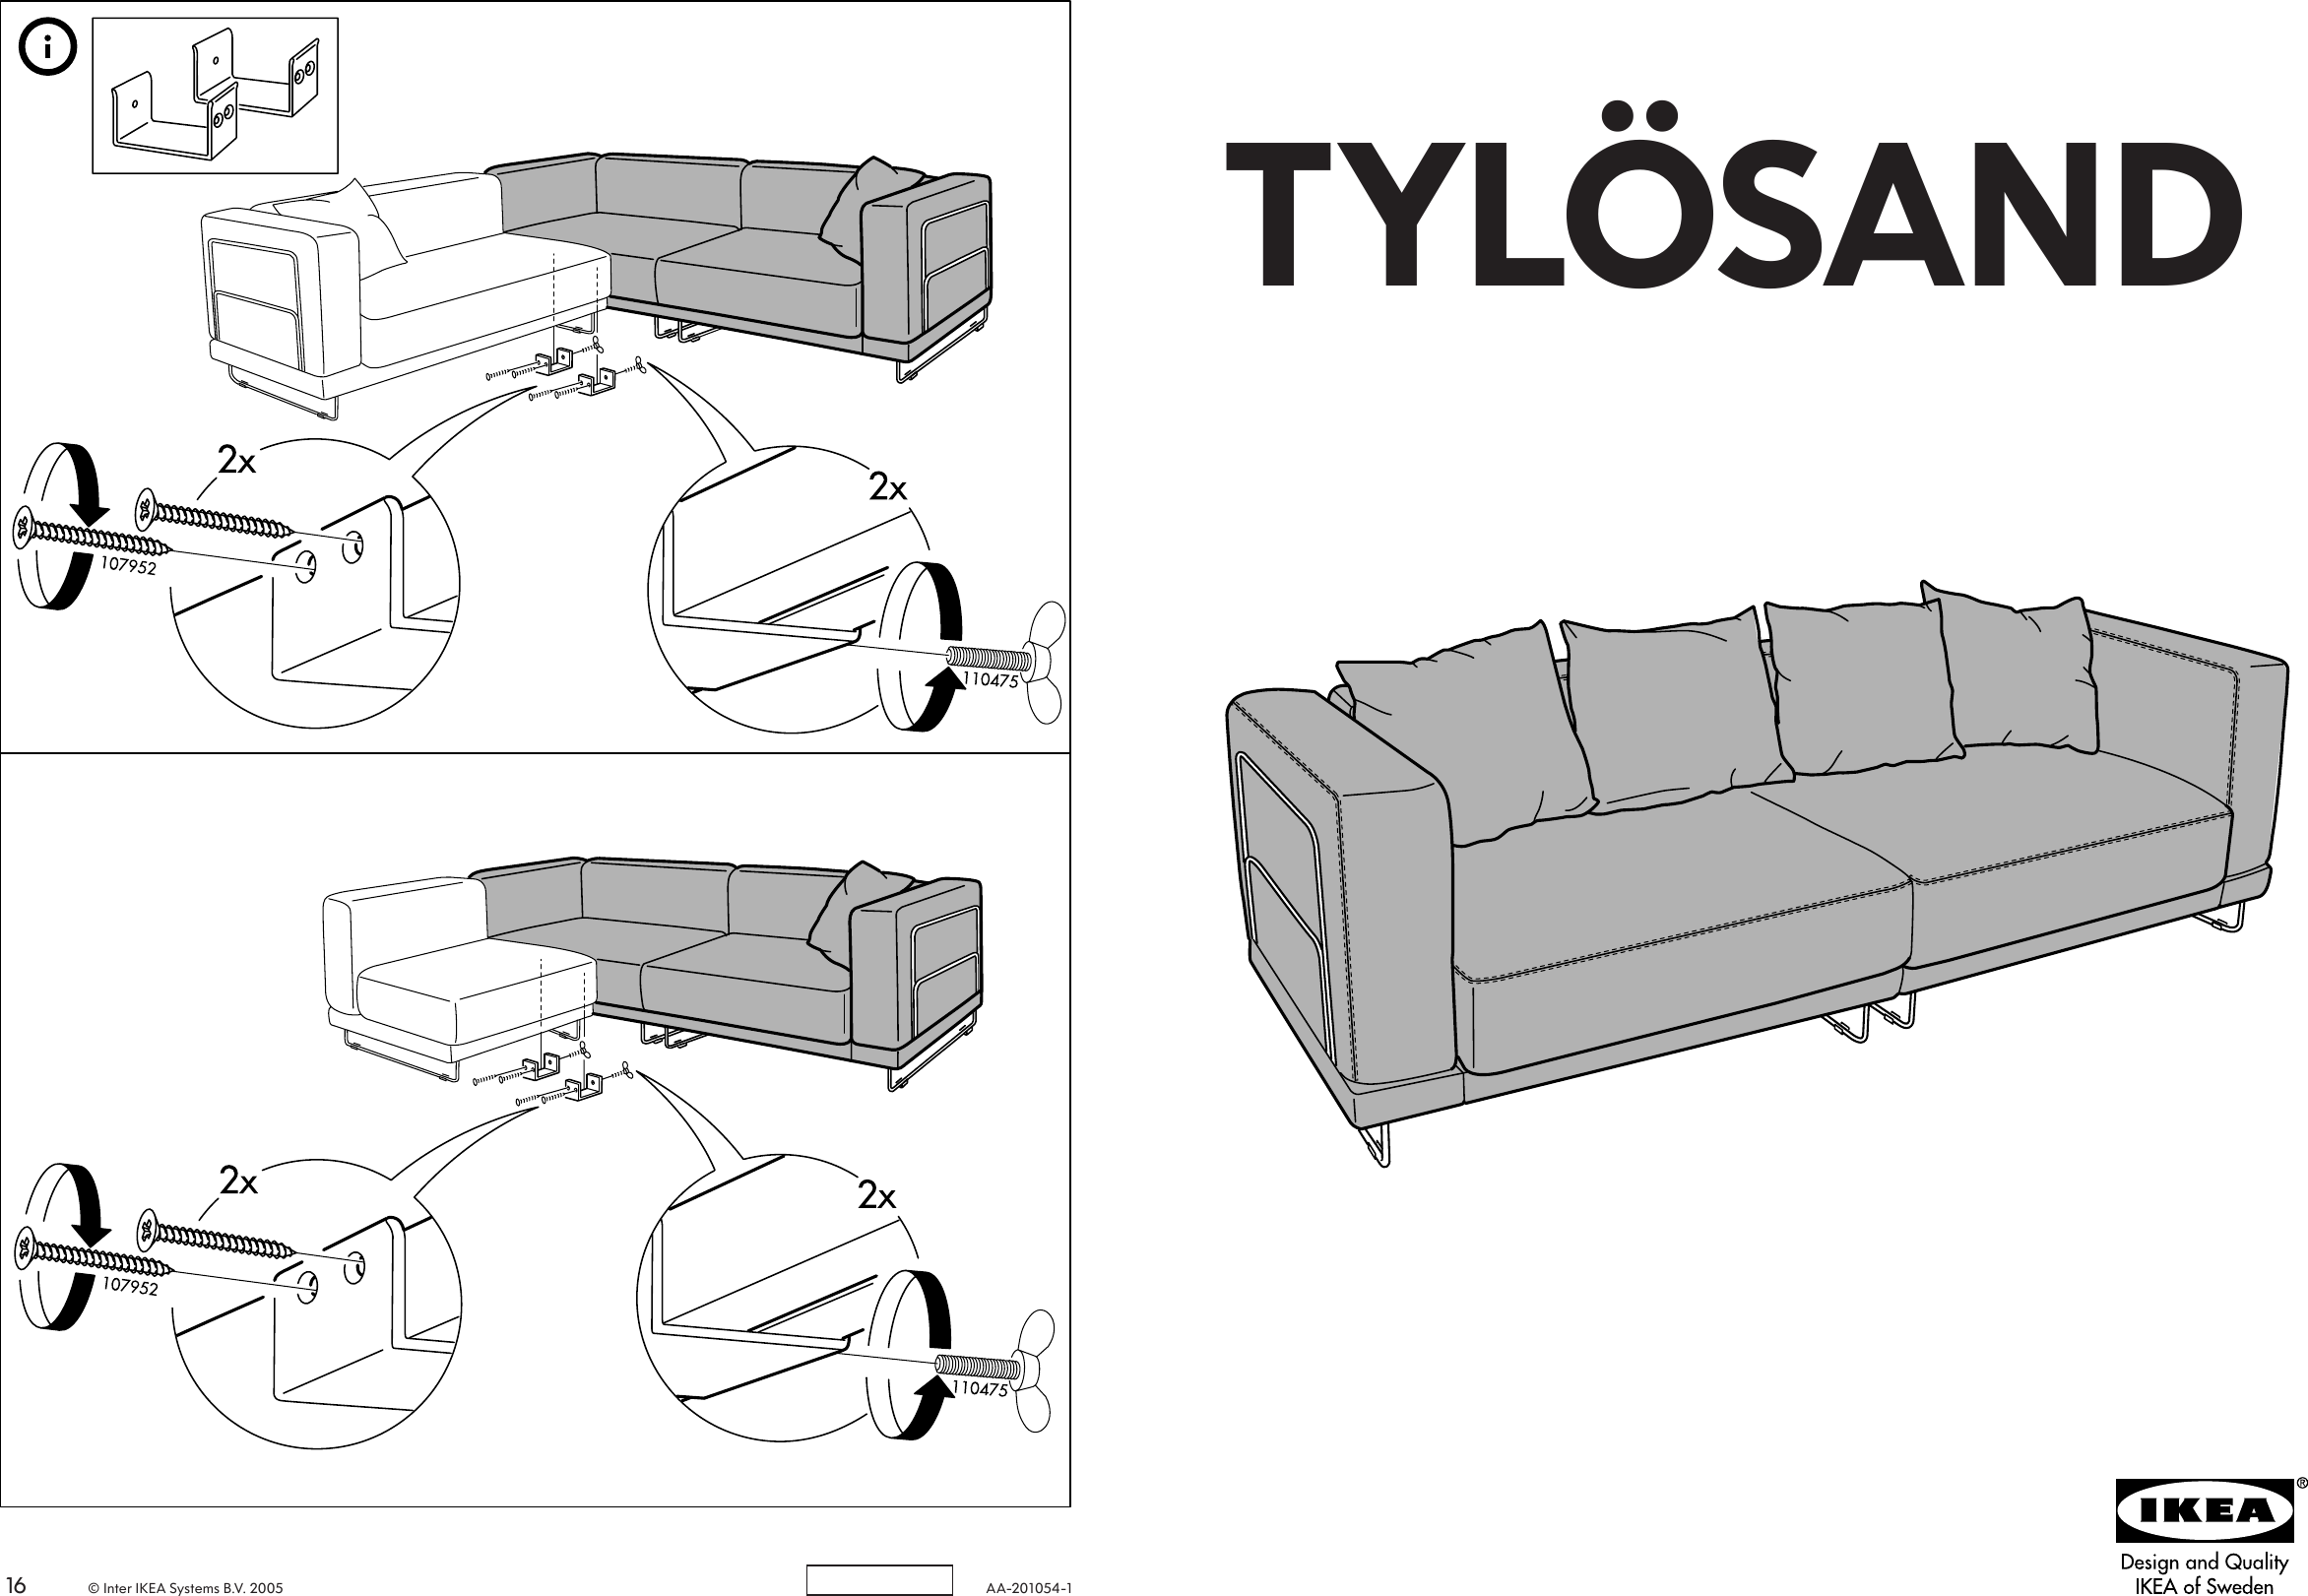 Page 1 of 8 - Ikea Ikea-Tylasand-Sofa-Bed-Cover-Assembly-Instruction